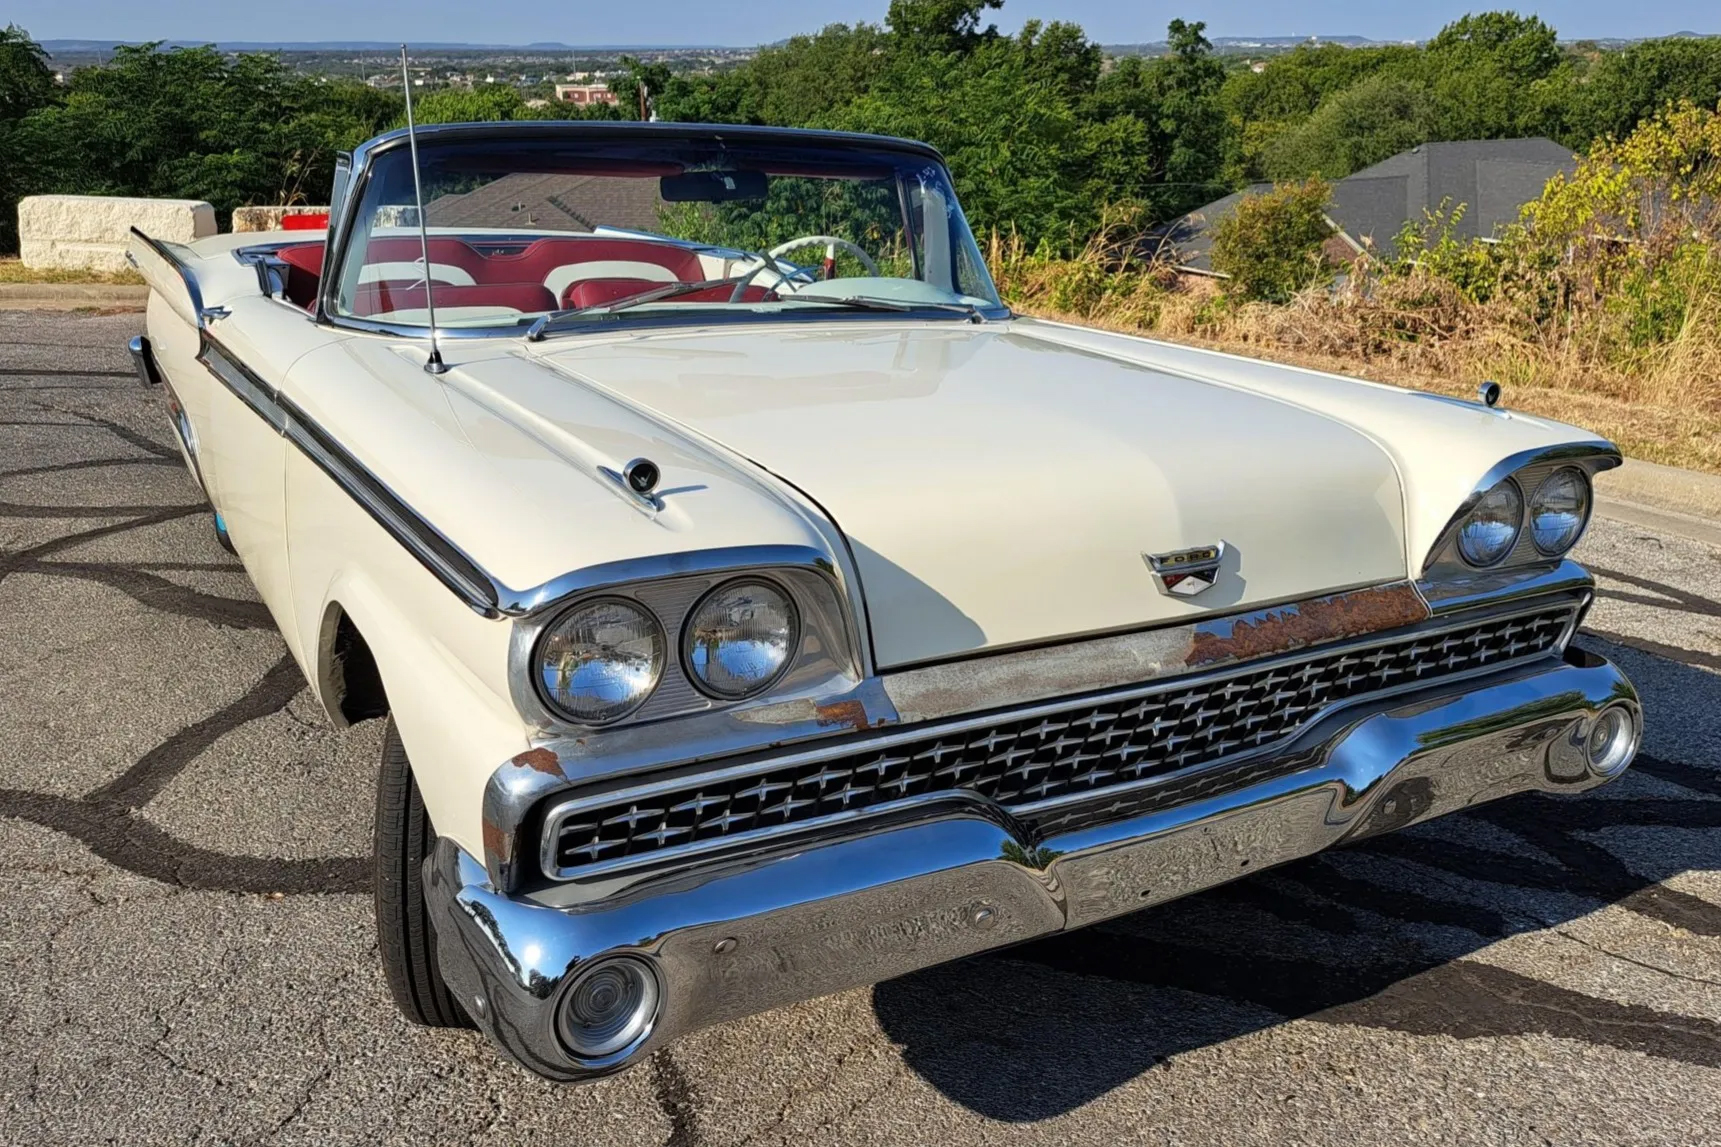 The 1959 Ford Galaxie Skyliner: A Classic Marvel of Innovation and Style